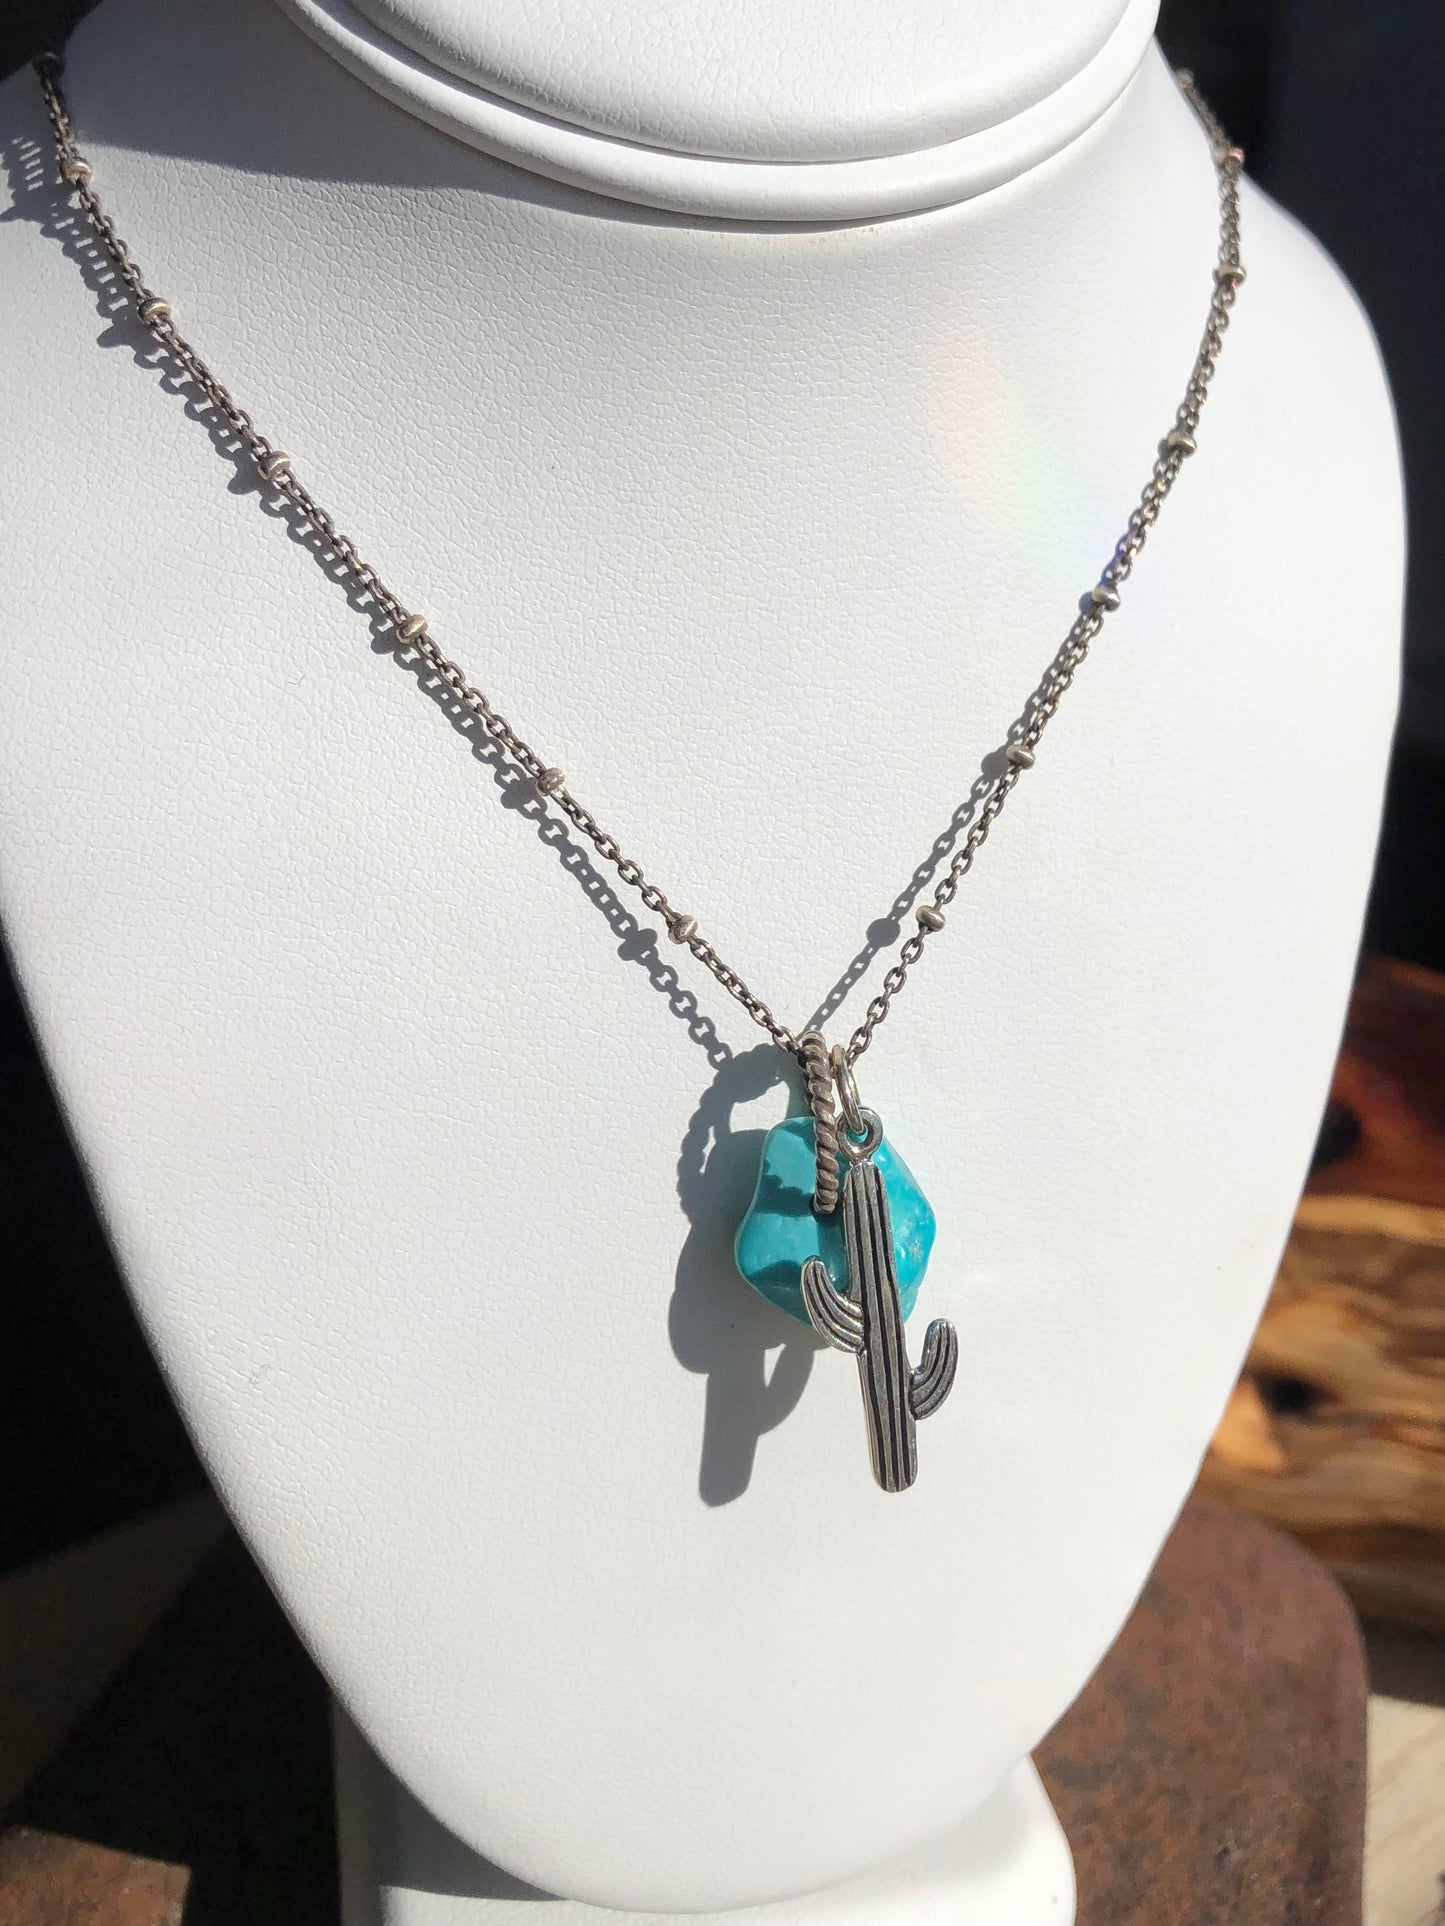 Turquoise Nugget Pendant Necklace - with Cactus Charm- Silver Fox Mine